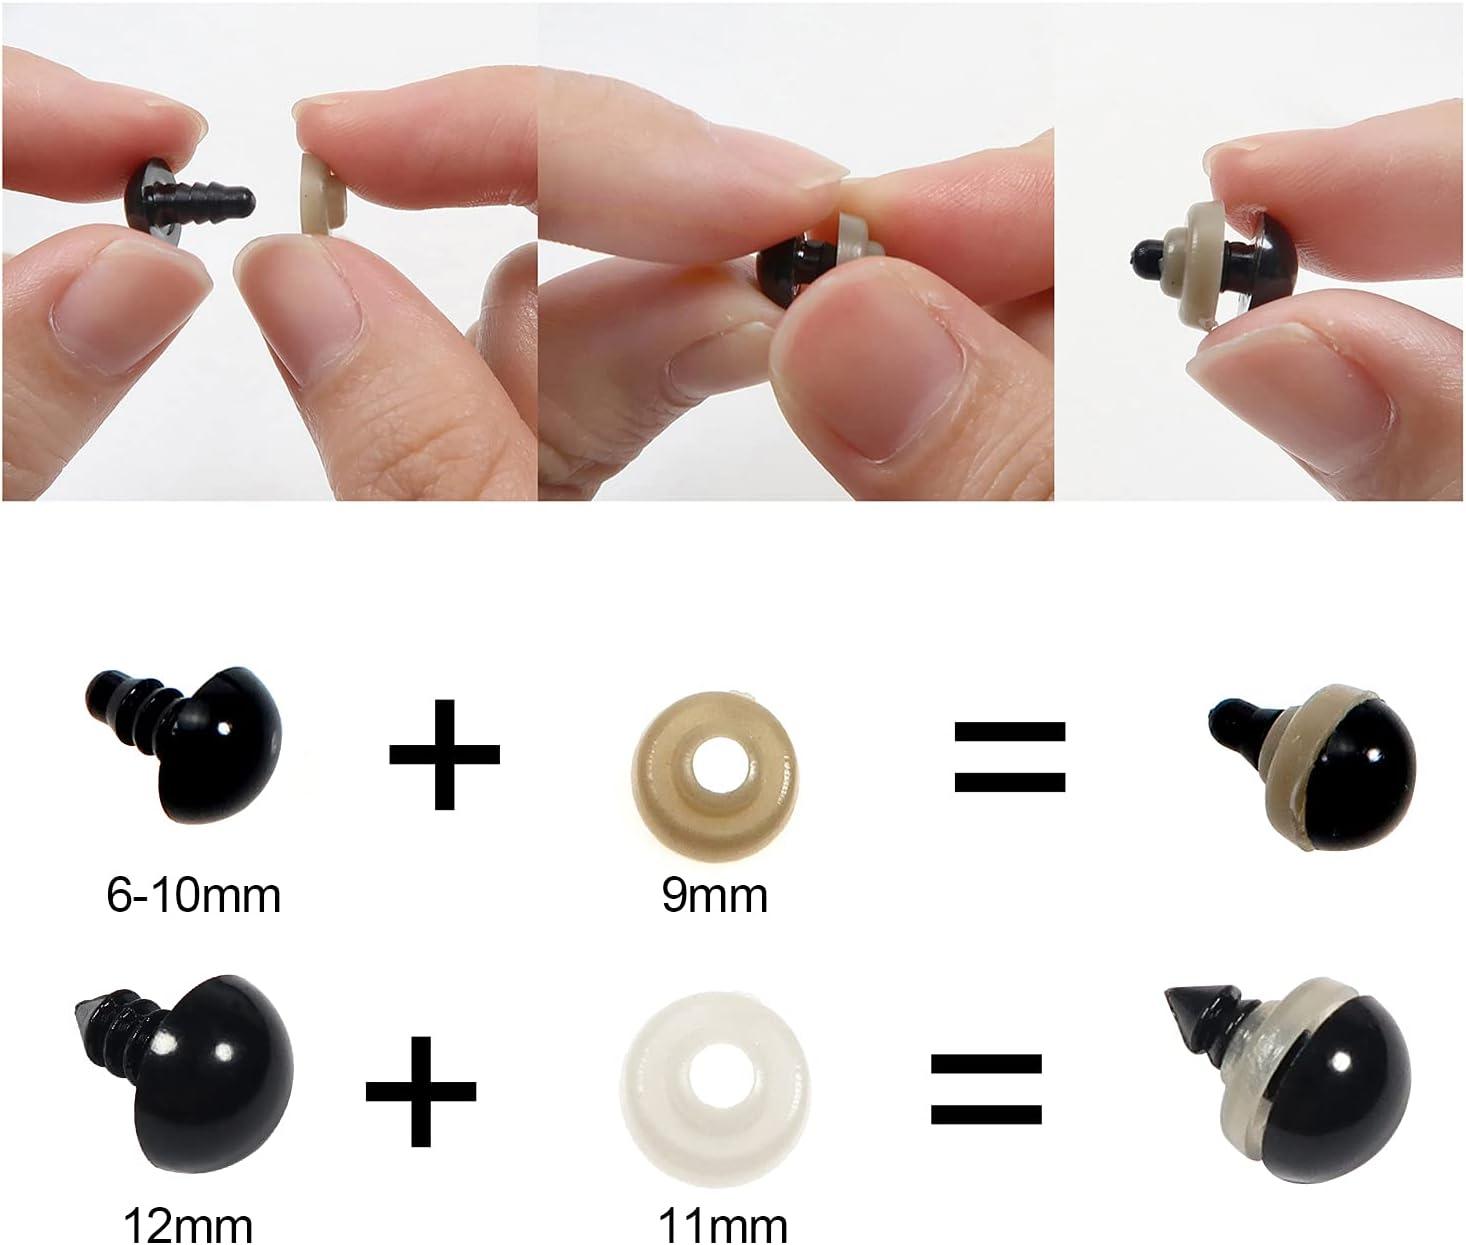 TOAOB 150pcs 6mm Black Plastic Safety Eyes Crafts Safety Eyes with Washers  for Stuffed Animals Amigurumis Crochet Bears Doll Making